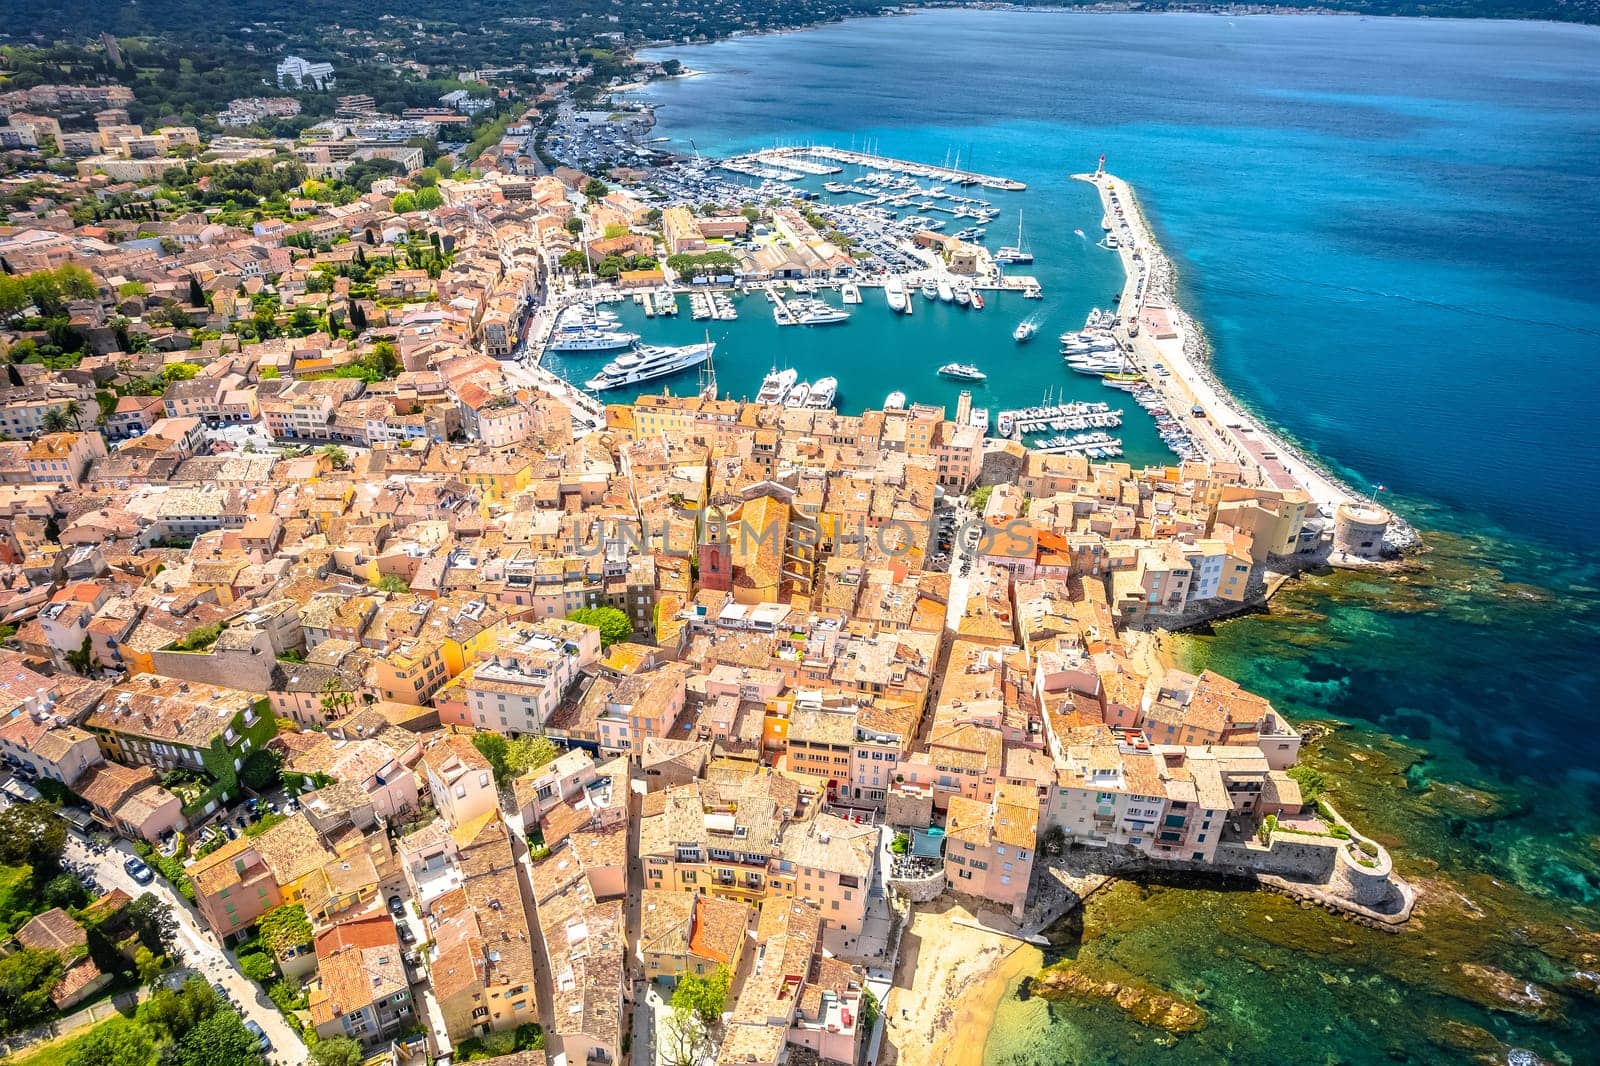 Village of Saint Tropez aerial view, luxury travel destination in South of France